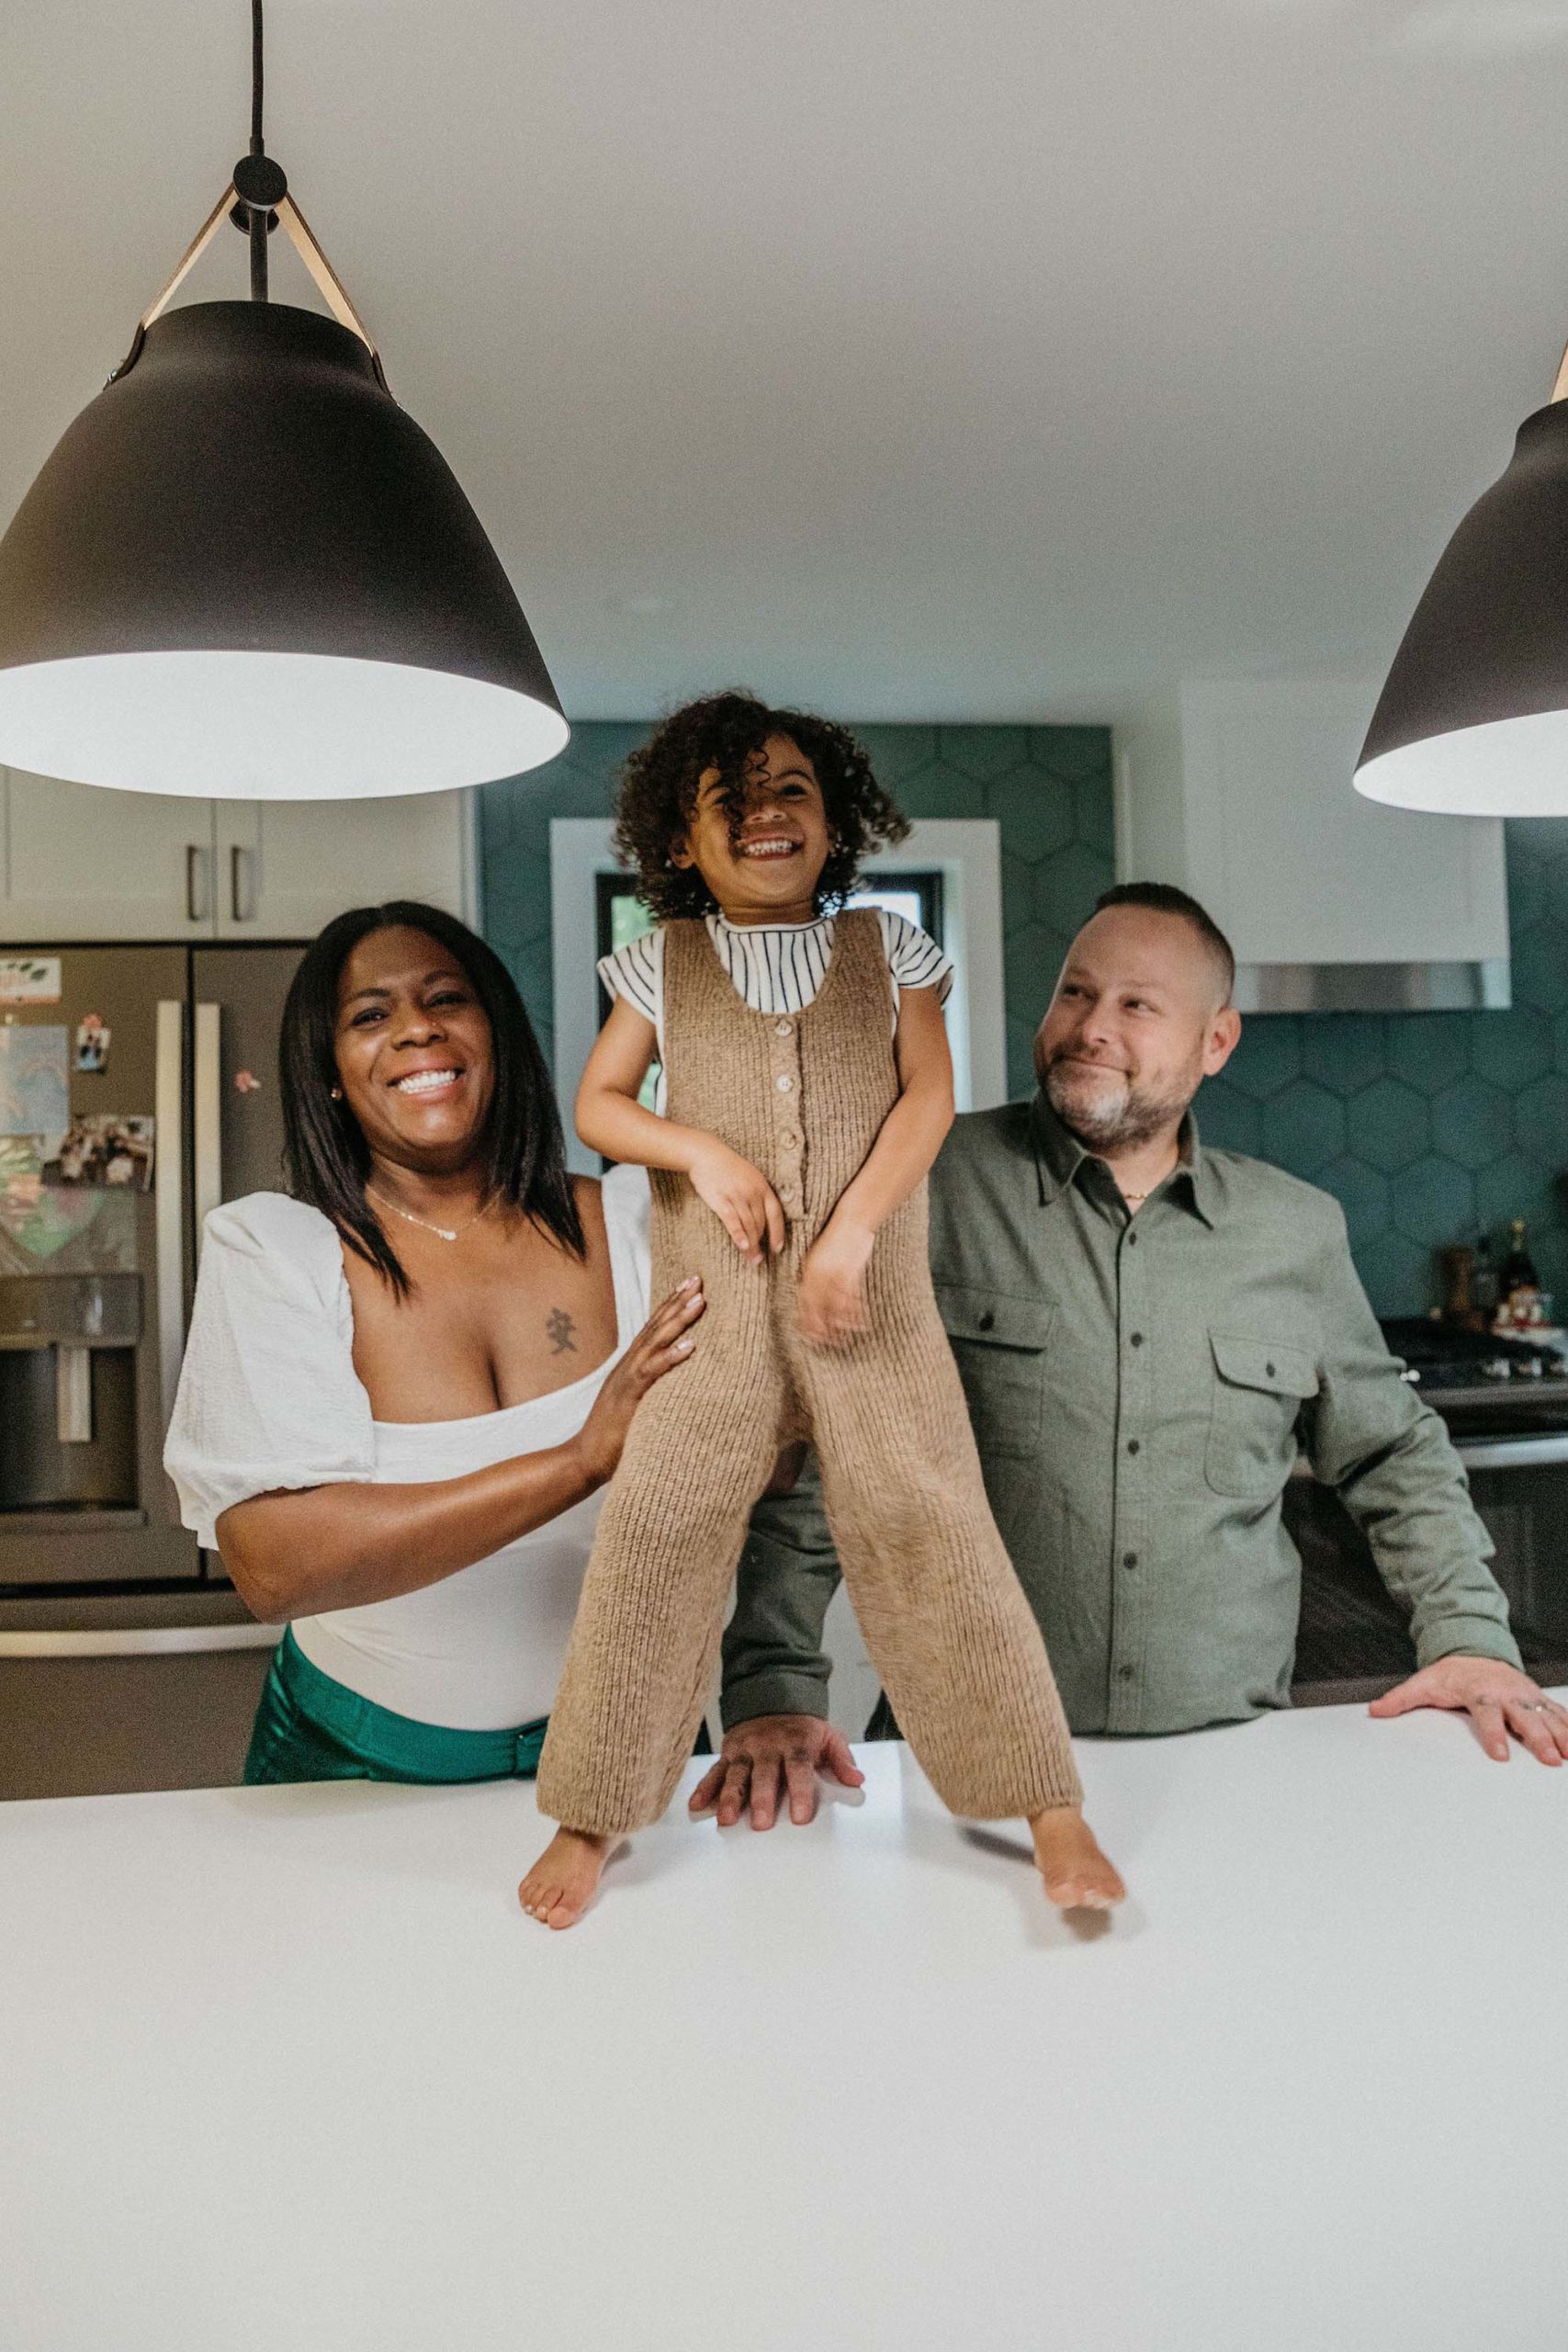 family of 3 portraits. mother father daughter kitchen photo session at home. Boston area NYC family photographer 